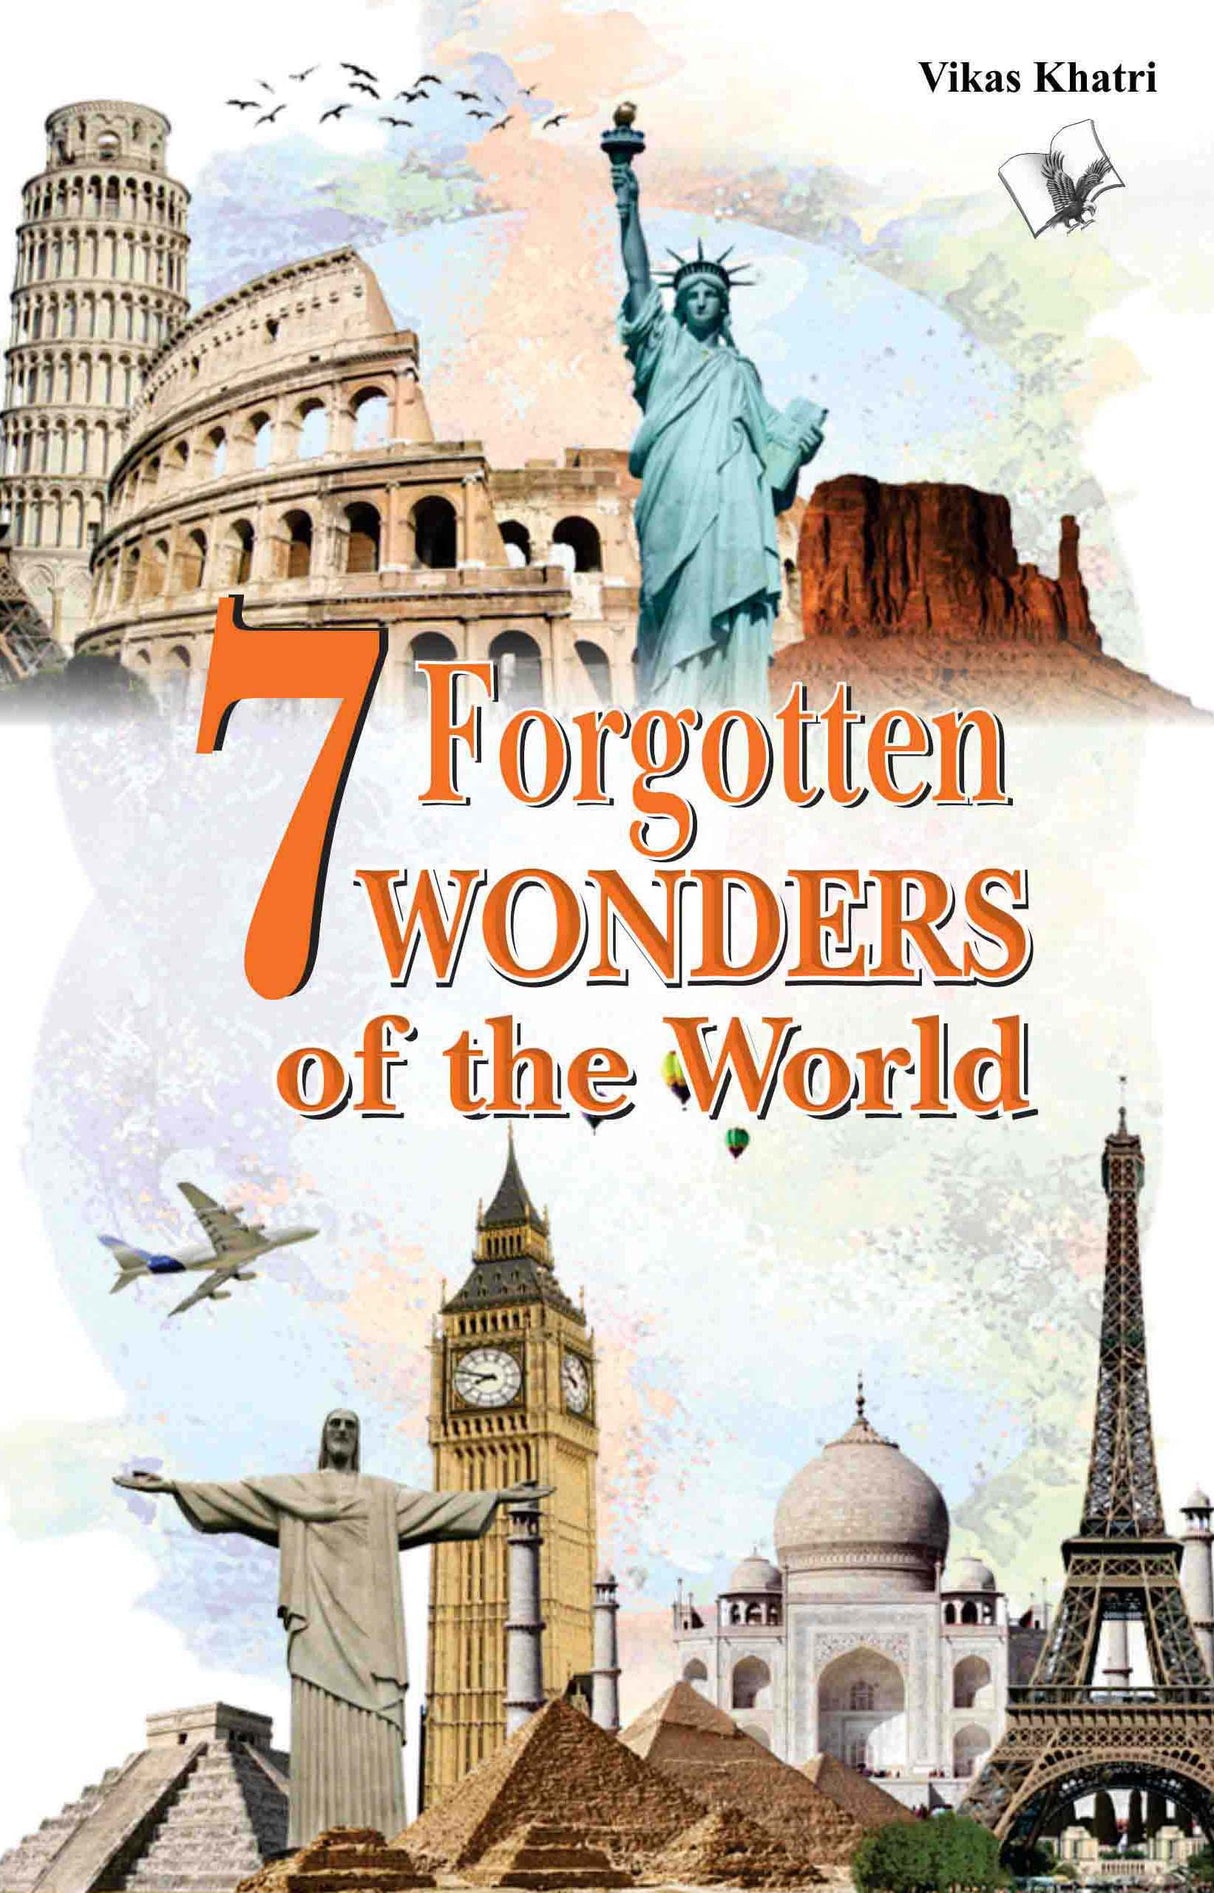 7 Forgotten Wonders of the World: Modern scientists wonder how they were built